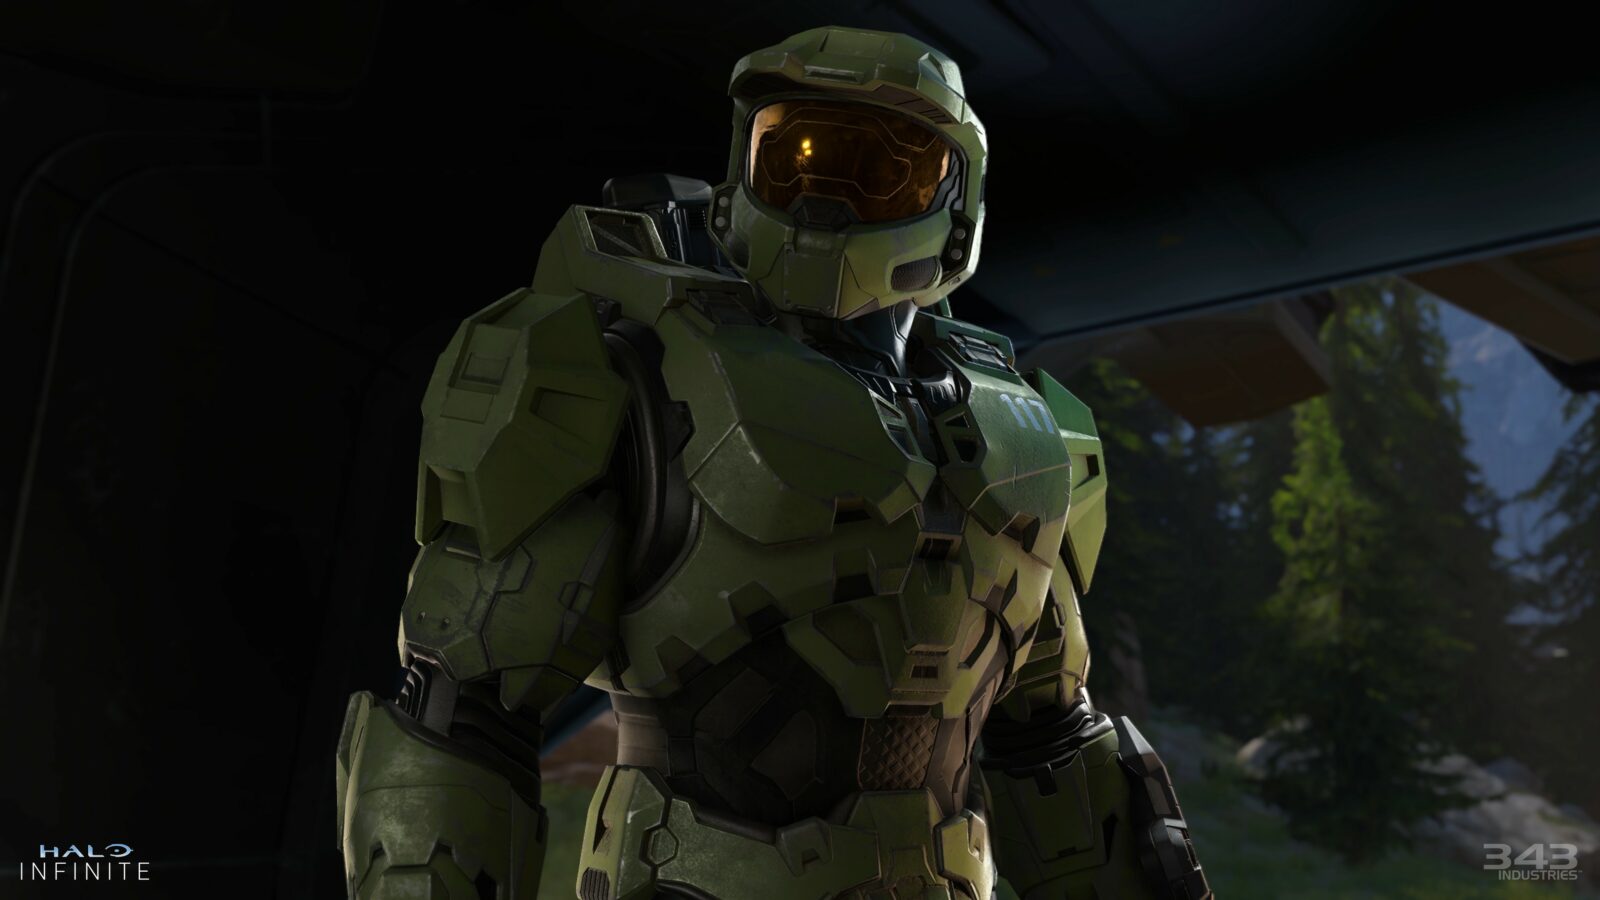 How long will Halo Infinite be free?